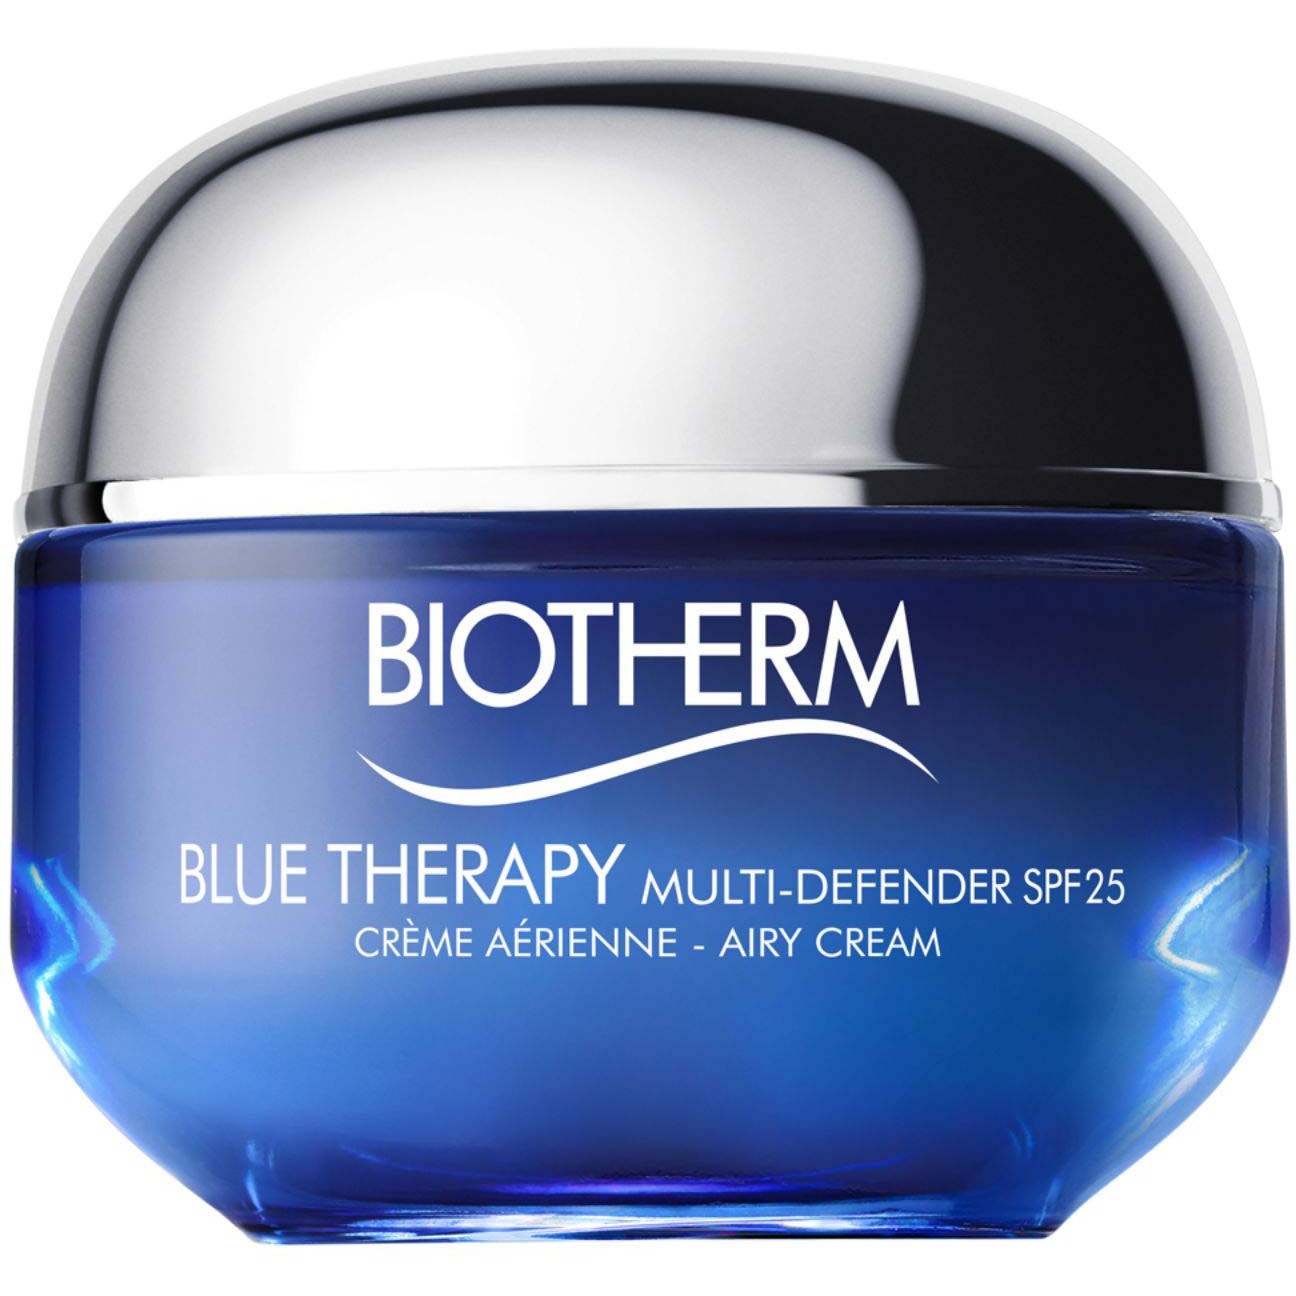 Biotherm Blue Therapy Multi-Defender SPF25 - Normal/Combination Skin 5